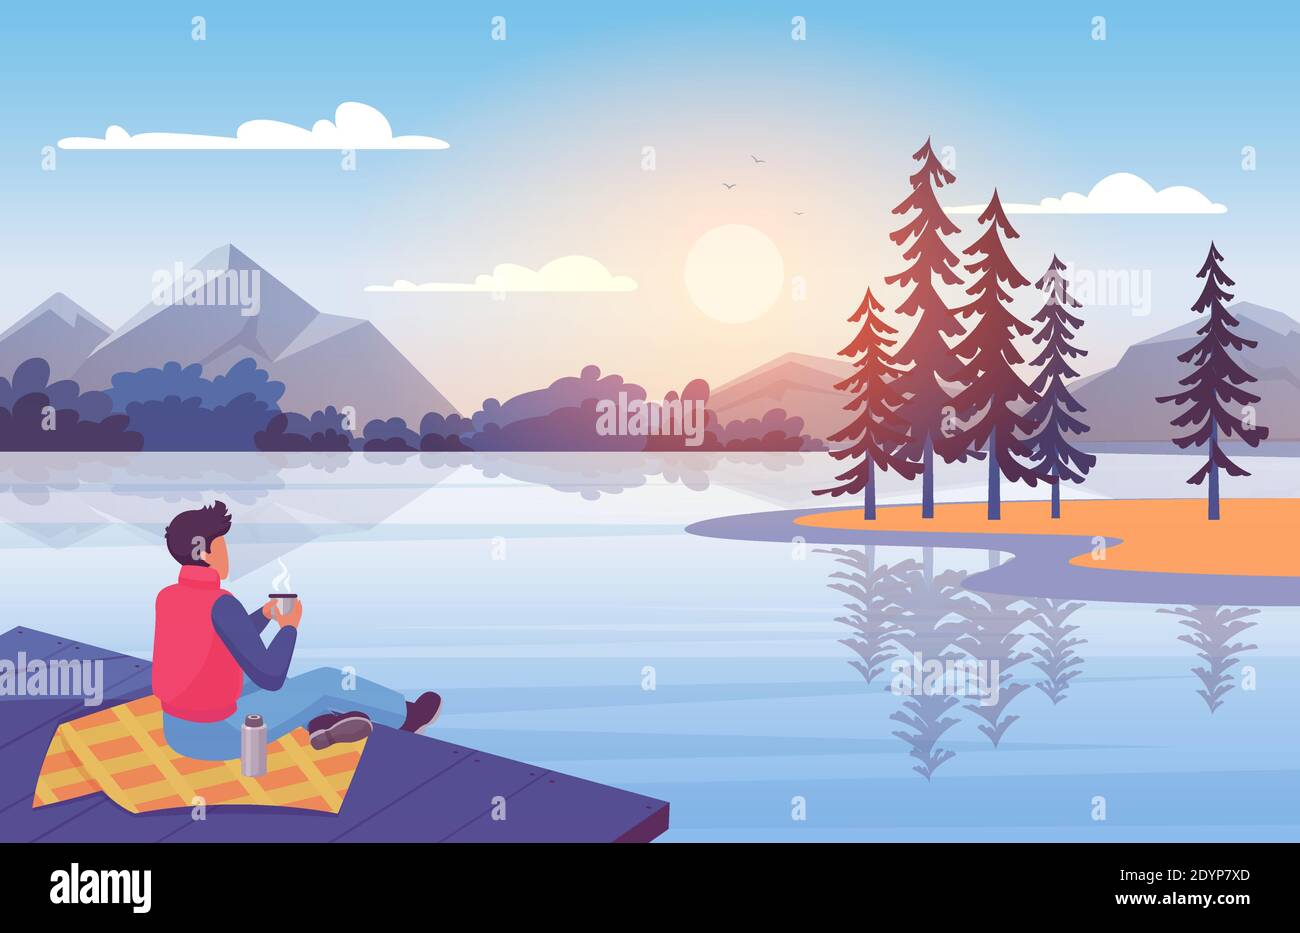 Enjoy nature at sunset vector illustration. Cartoon young man character sitting on wooden pier, enjoying natural outdoor landscape, blue lake, island with pine trees, mountains and sun above horizon Stock Vector